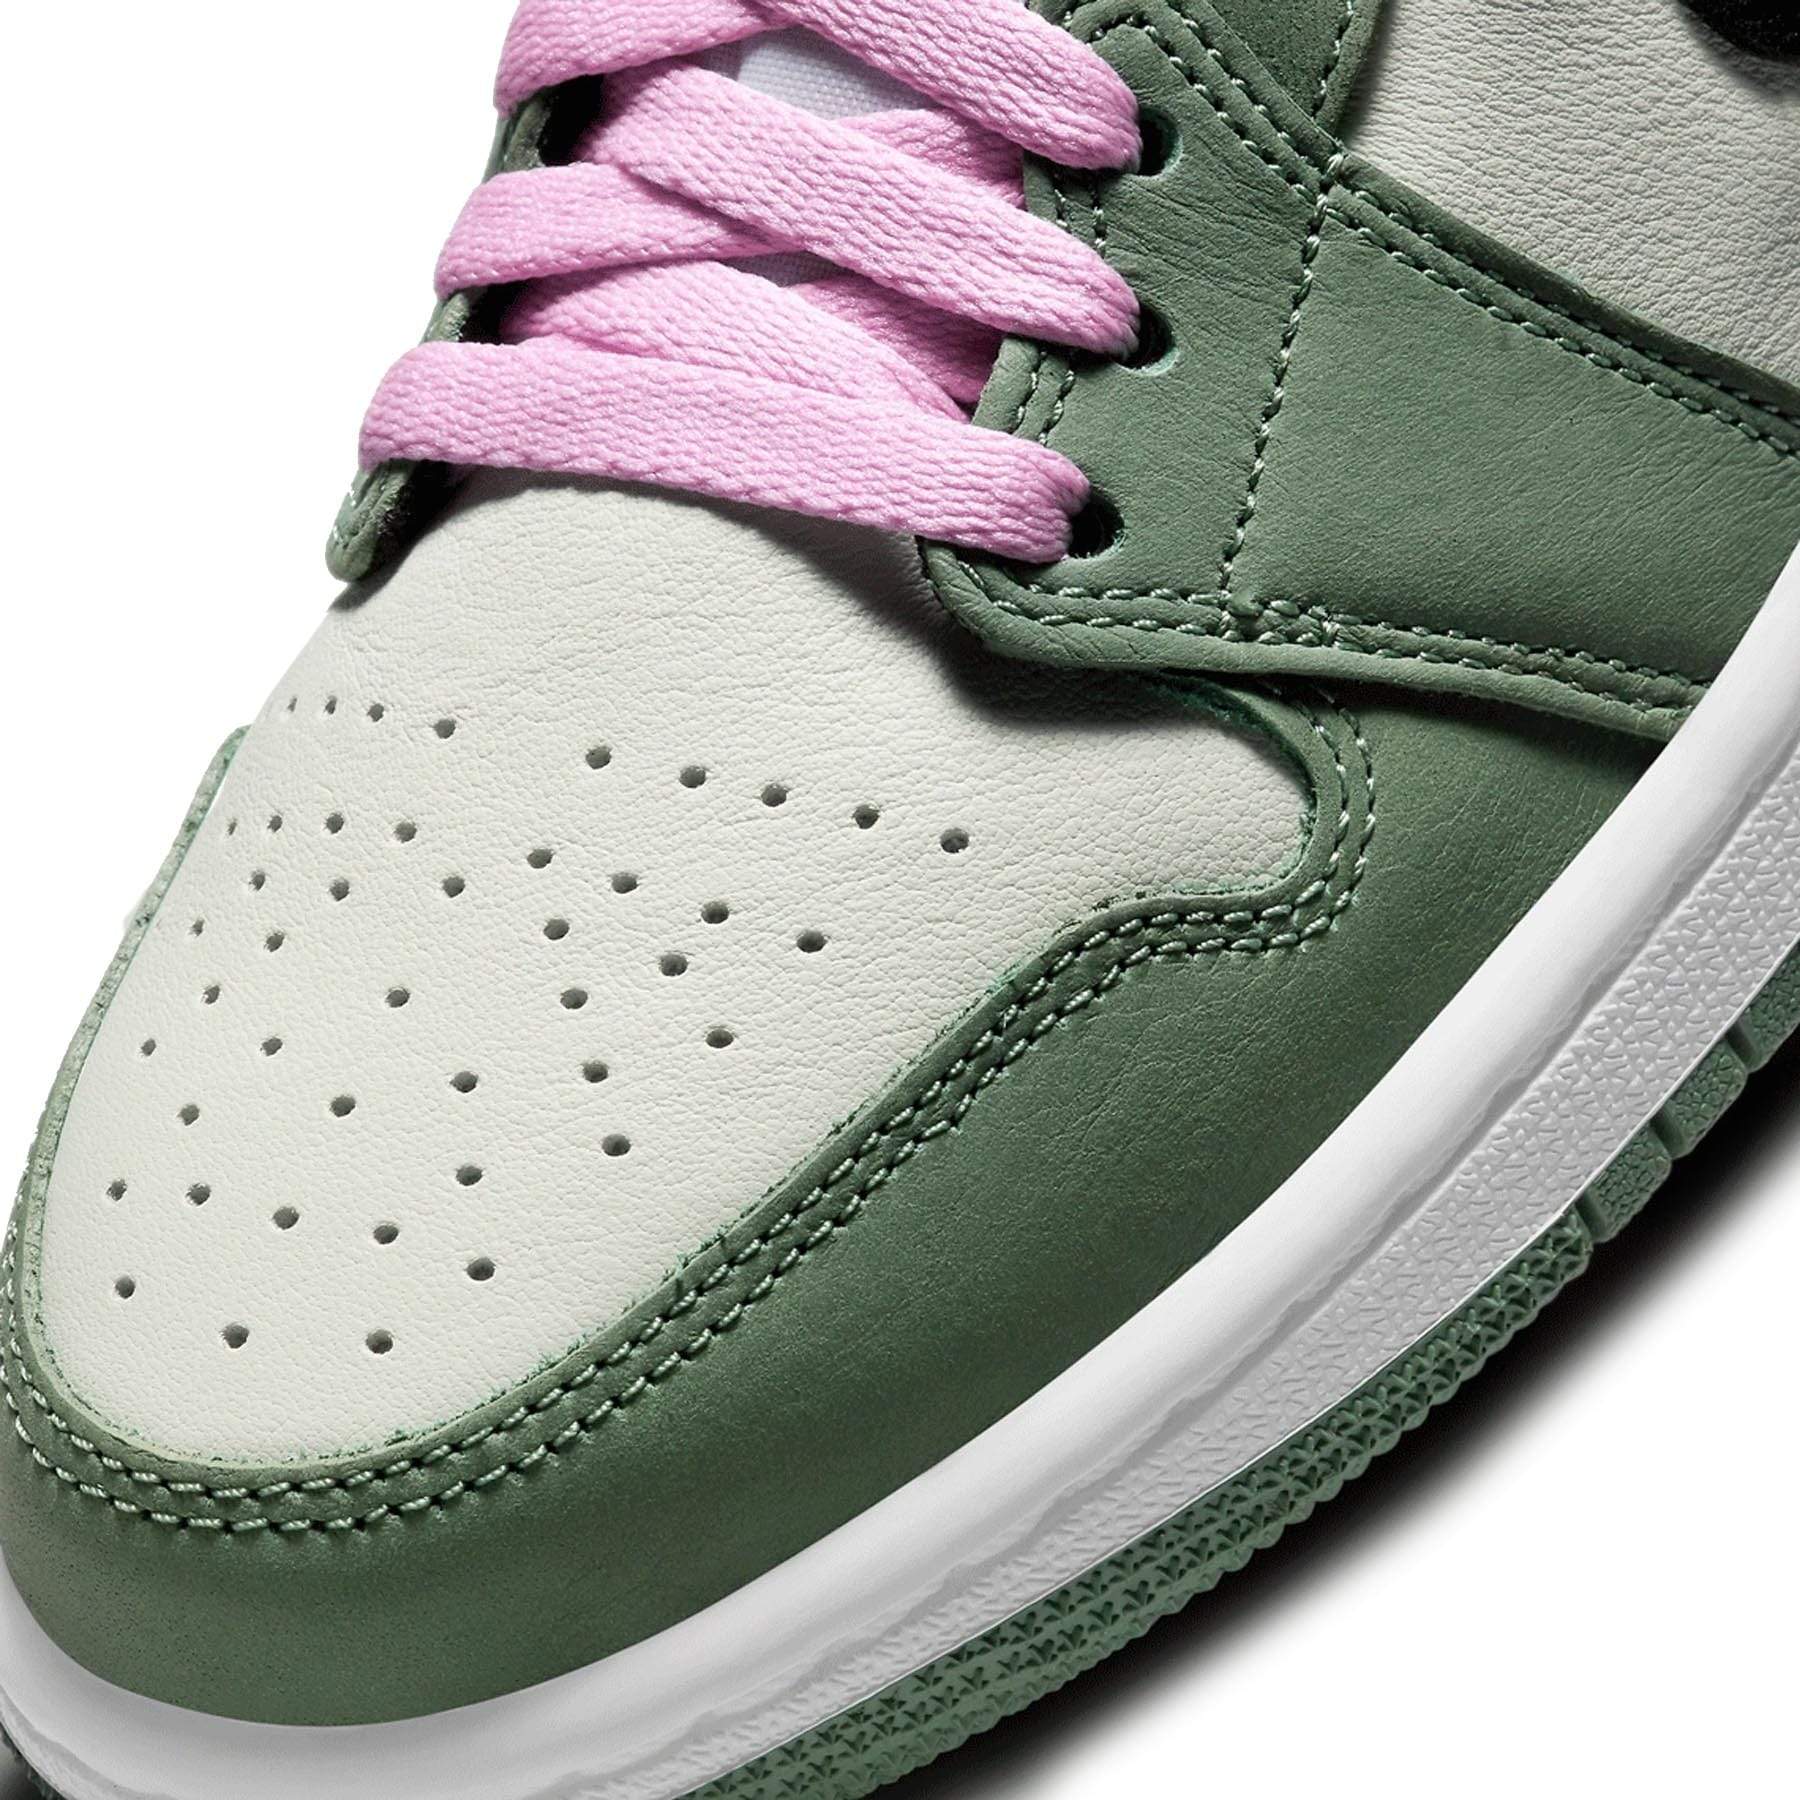 green jordans with pink laces